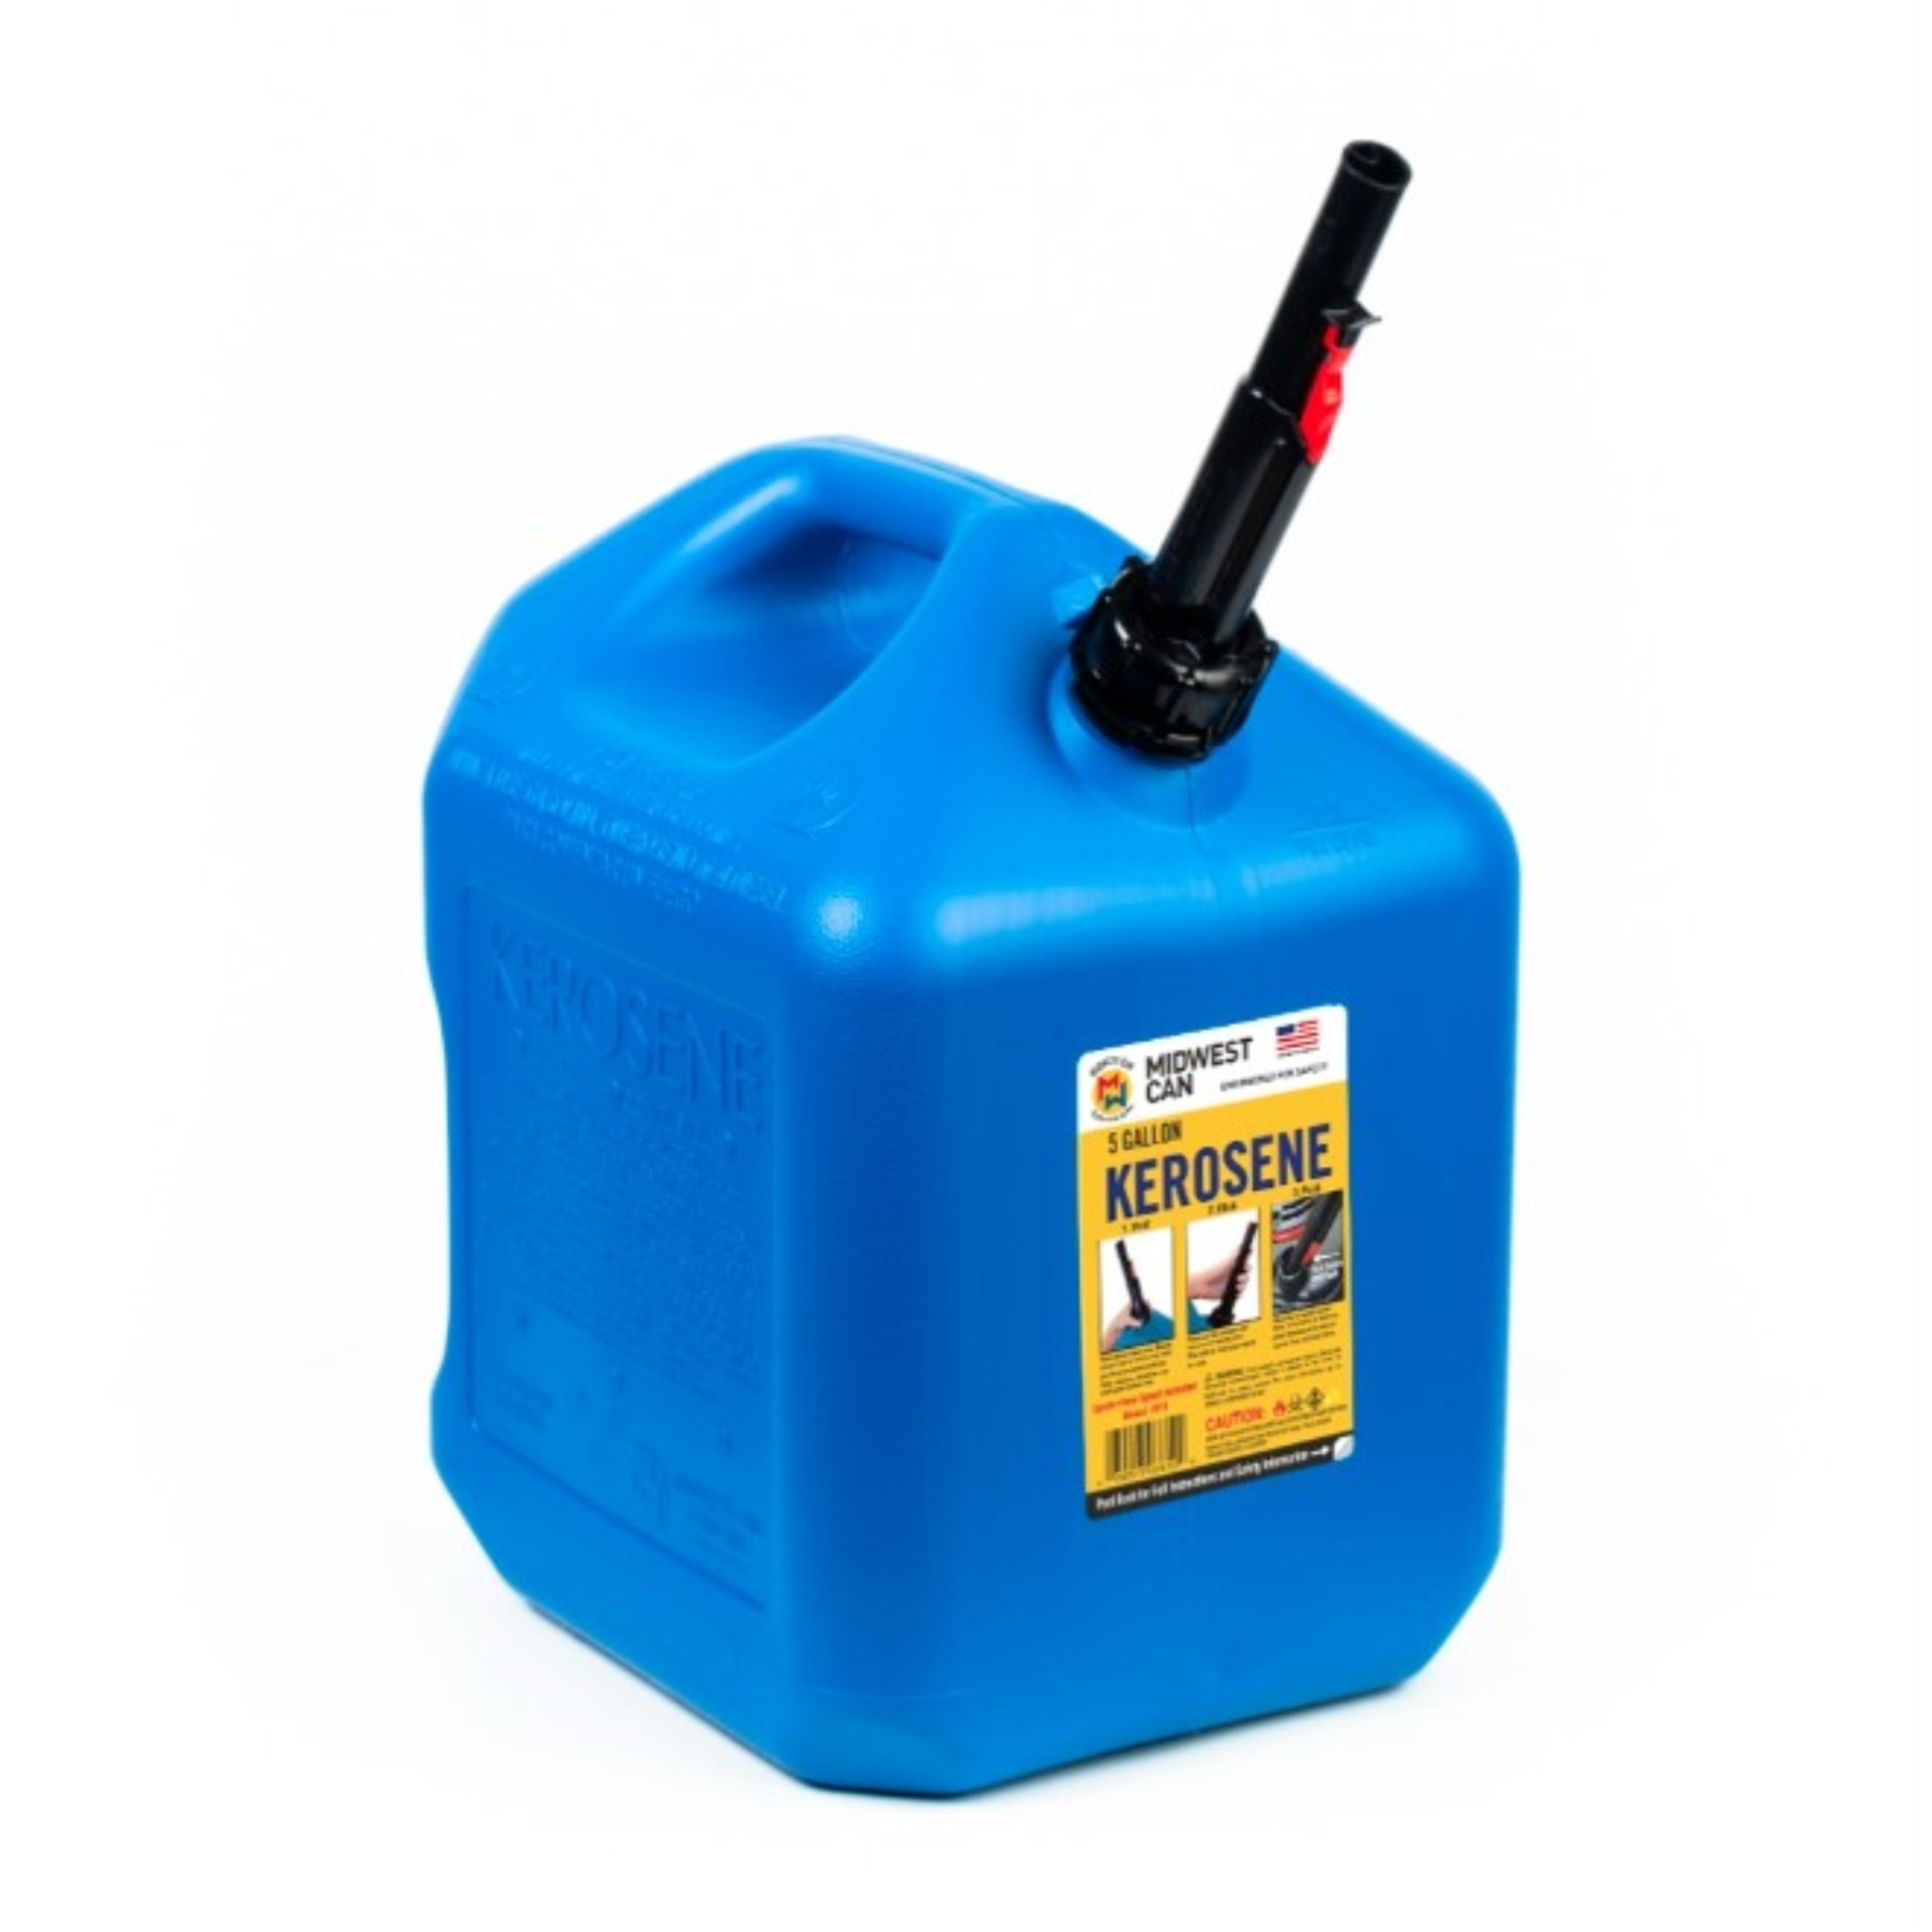 Midwest Can Kerosene Can With Flame Shield Safety System, Blue 5 Gallons